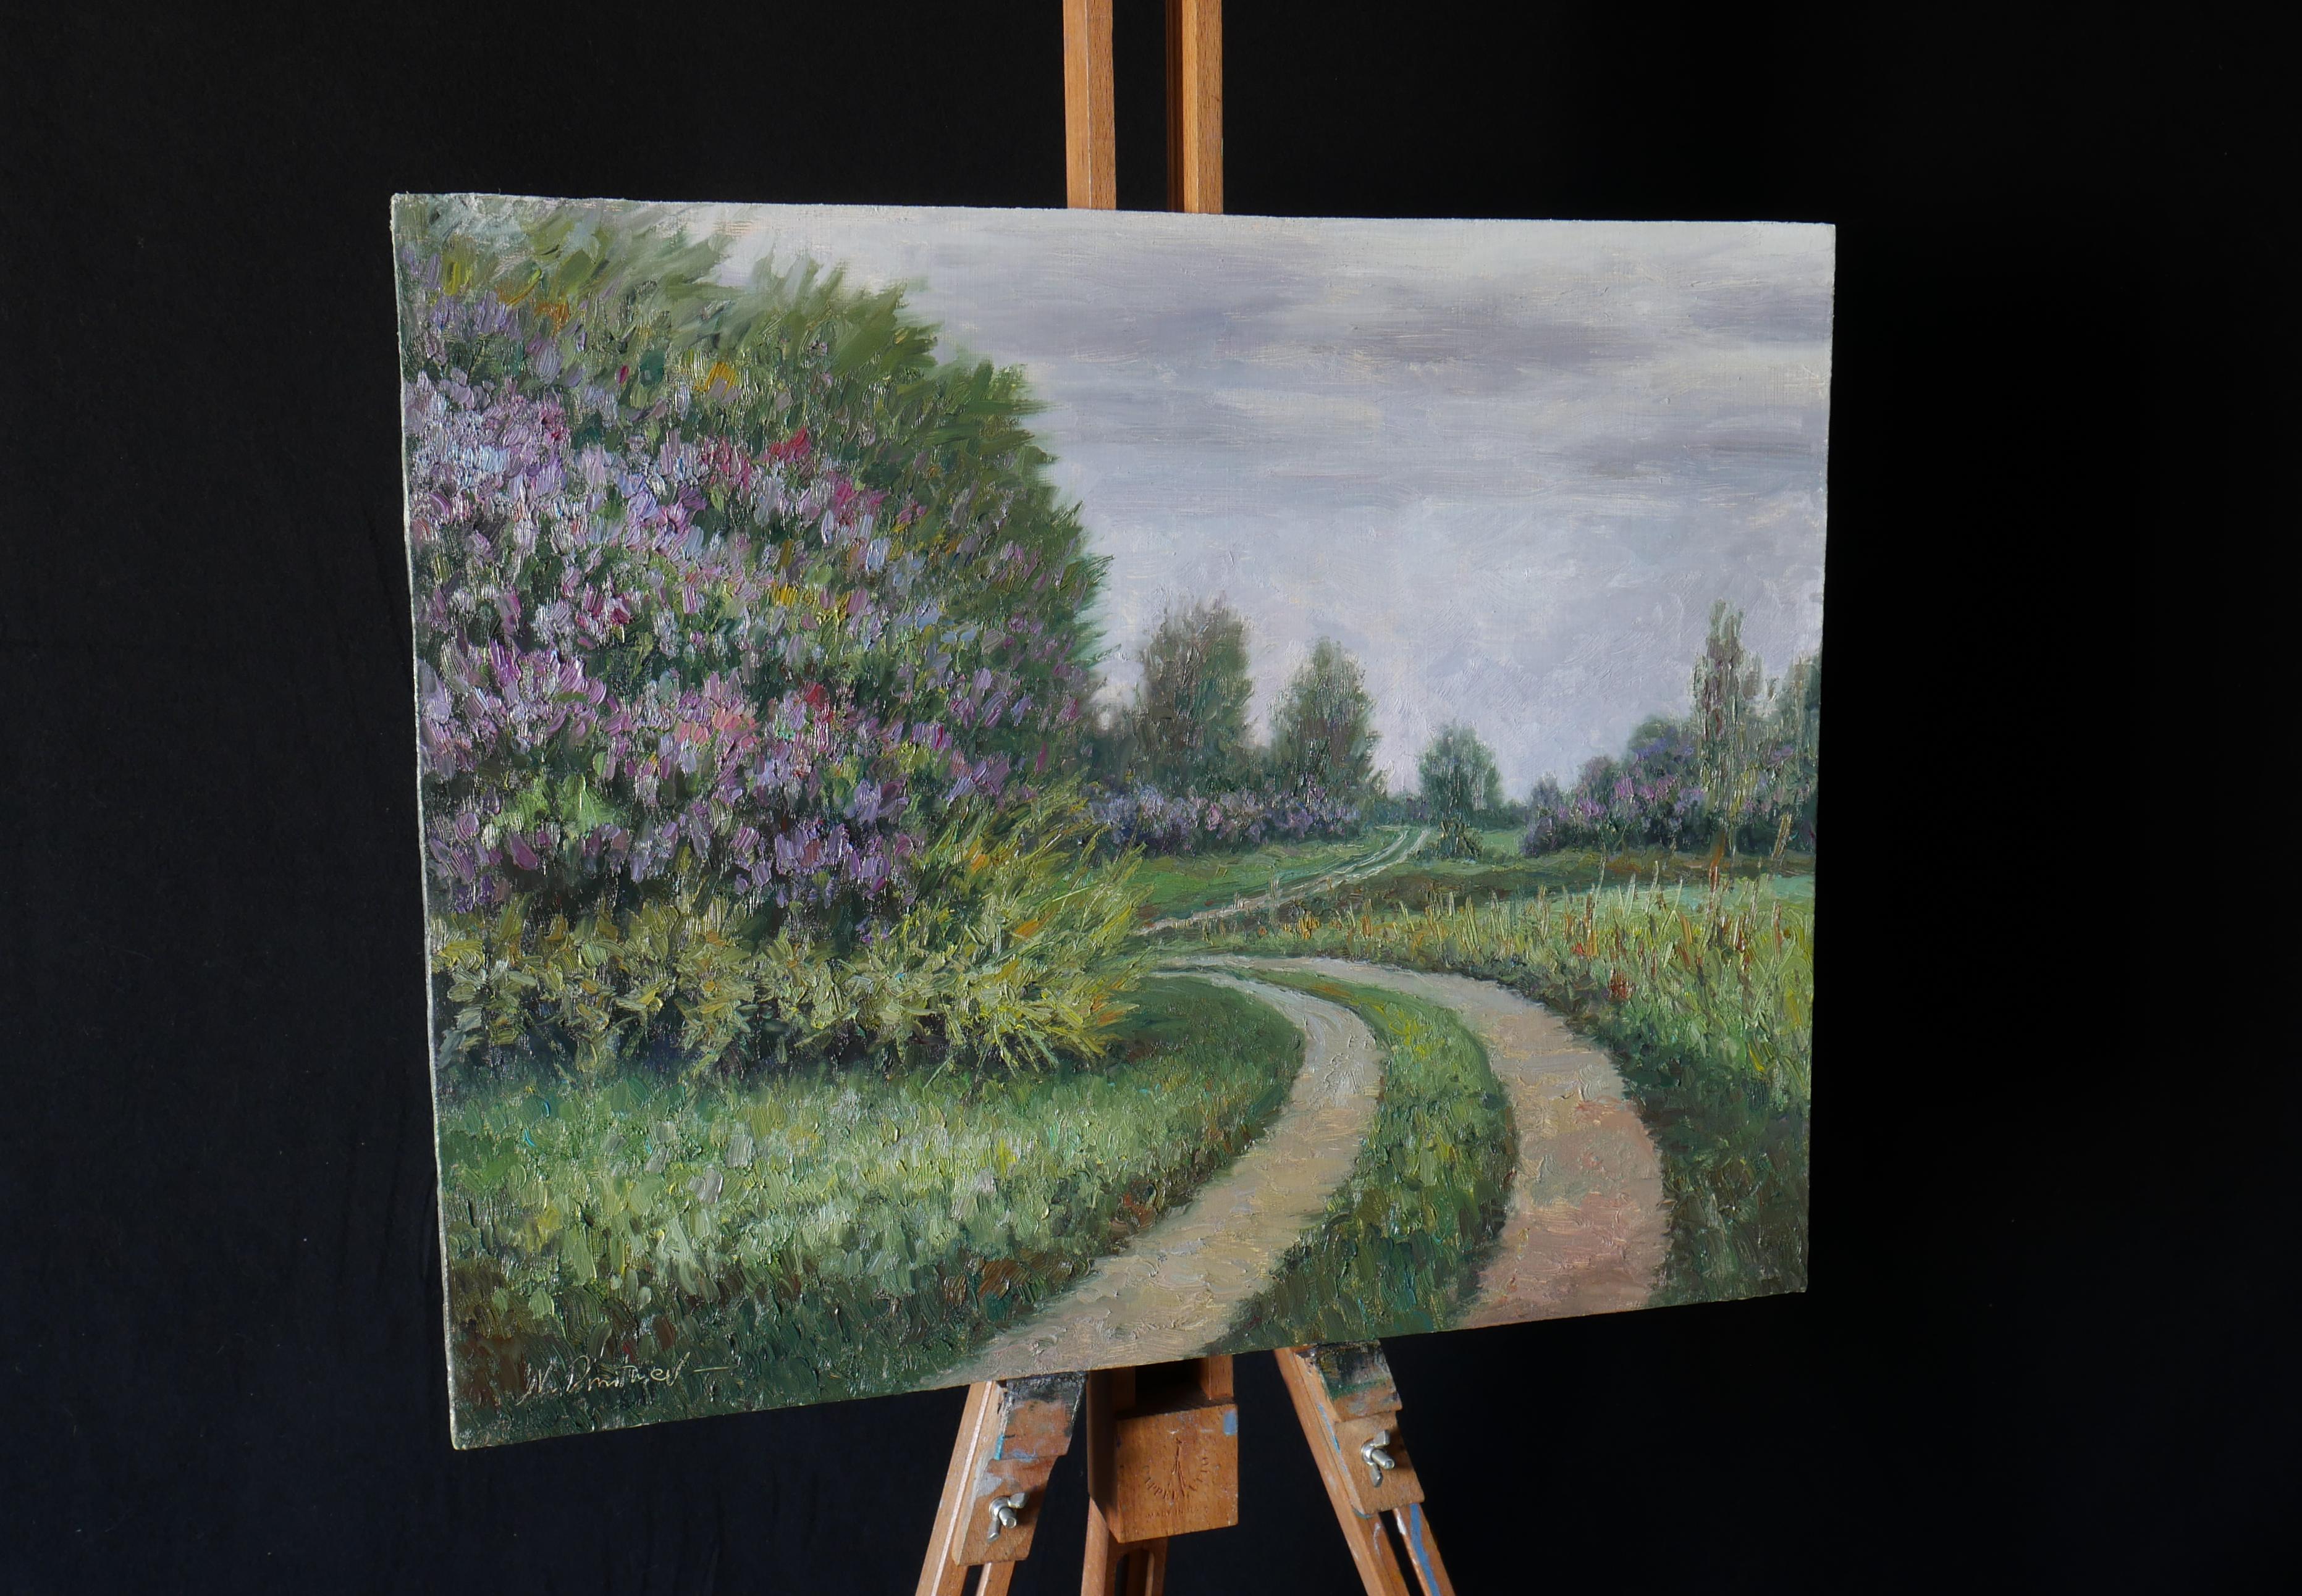 The Lilac Road - spring landscape painting - Painting by Nikolay Dmitriev